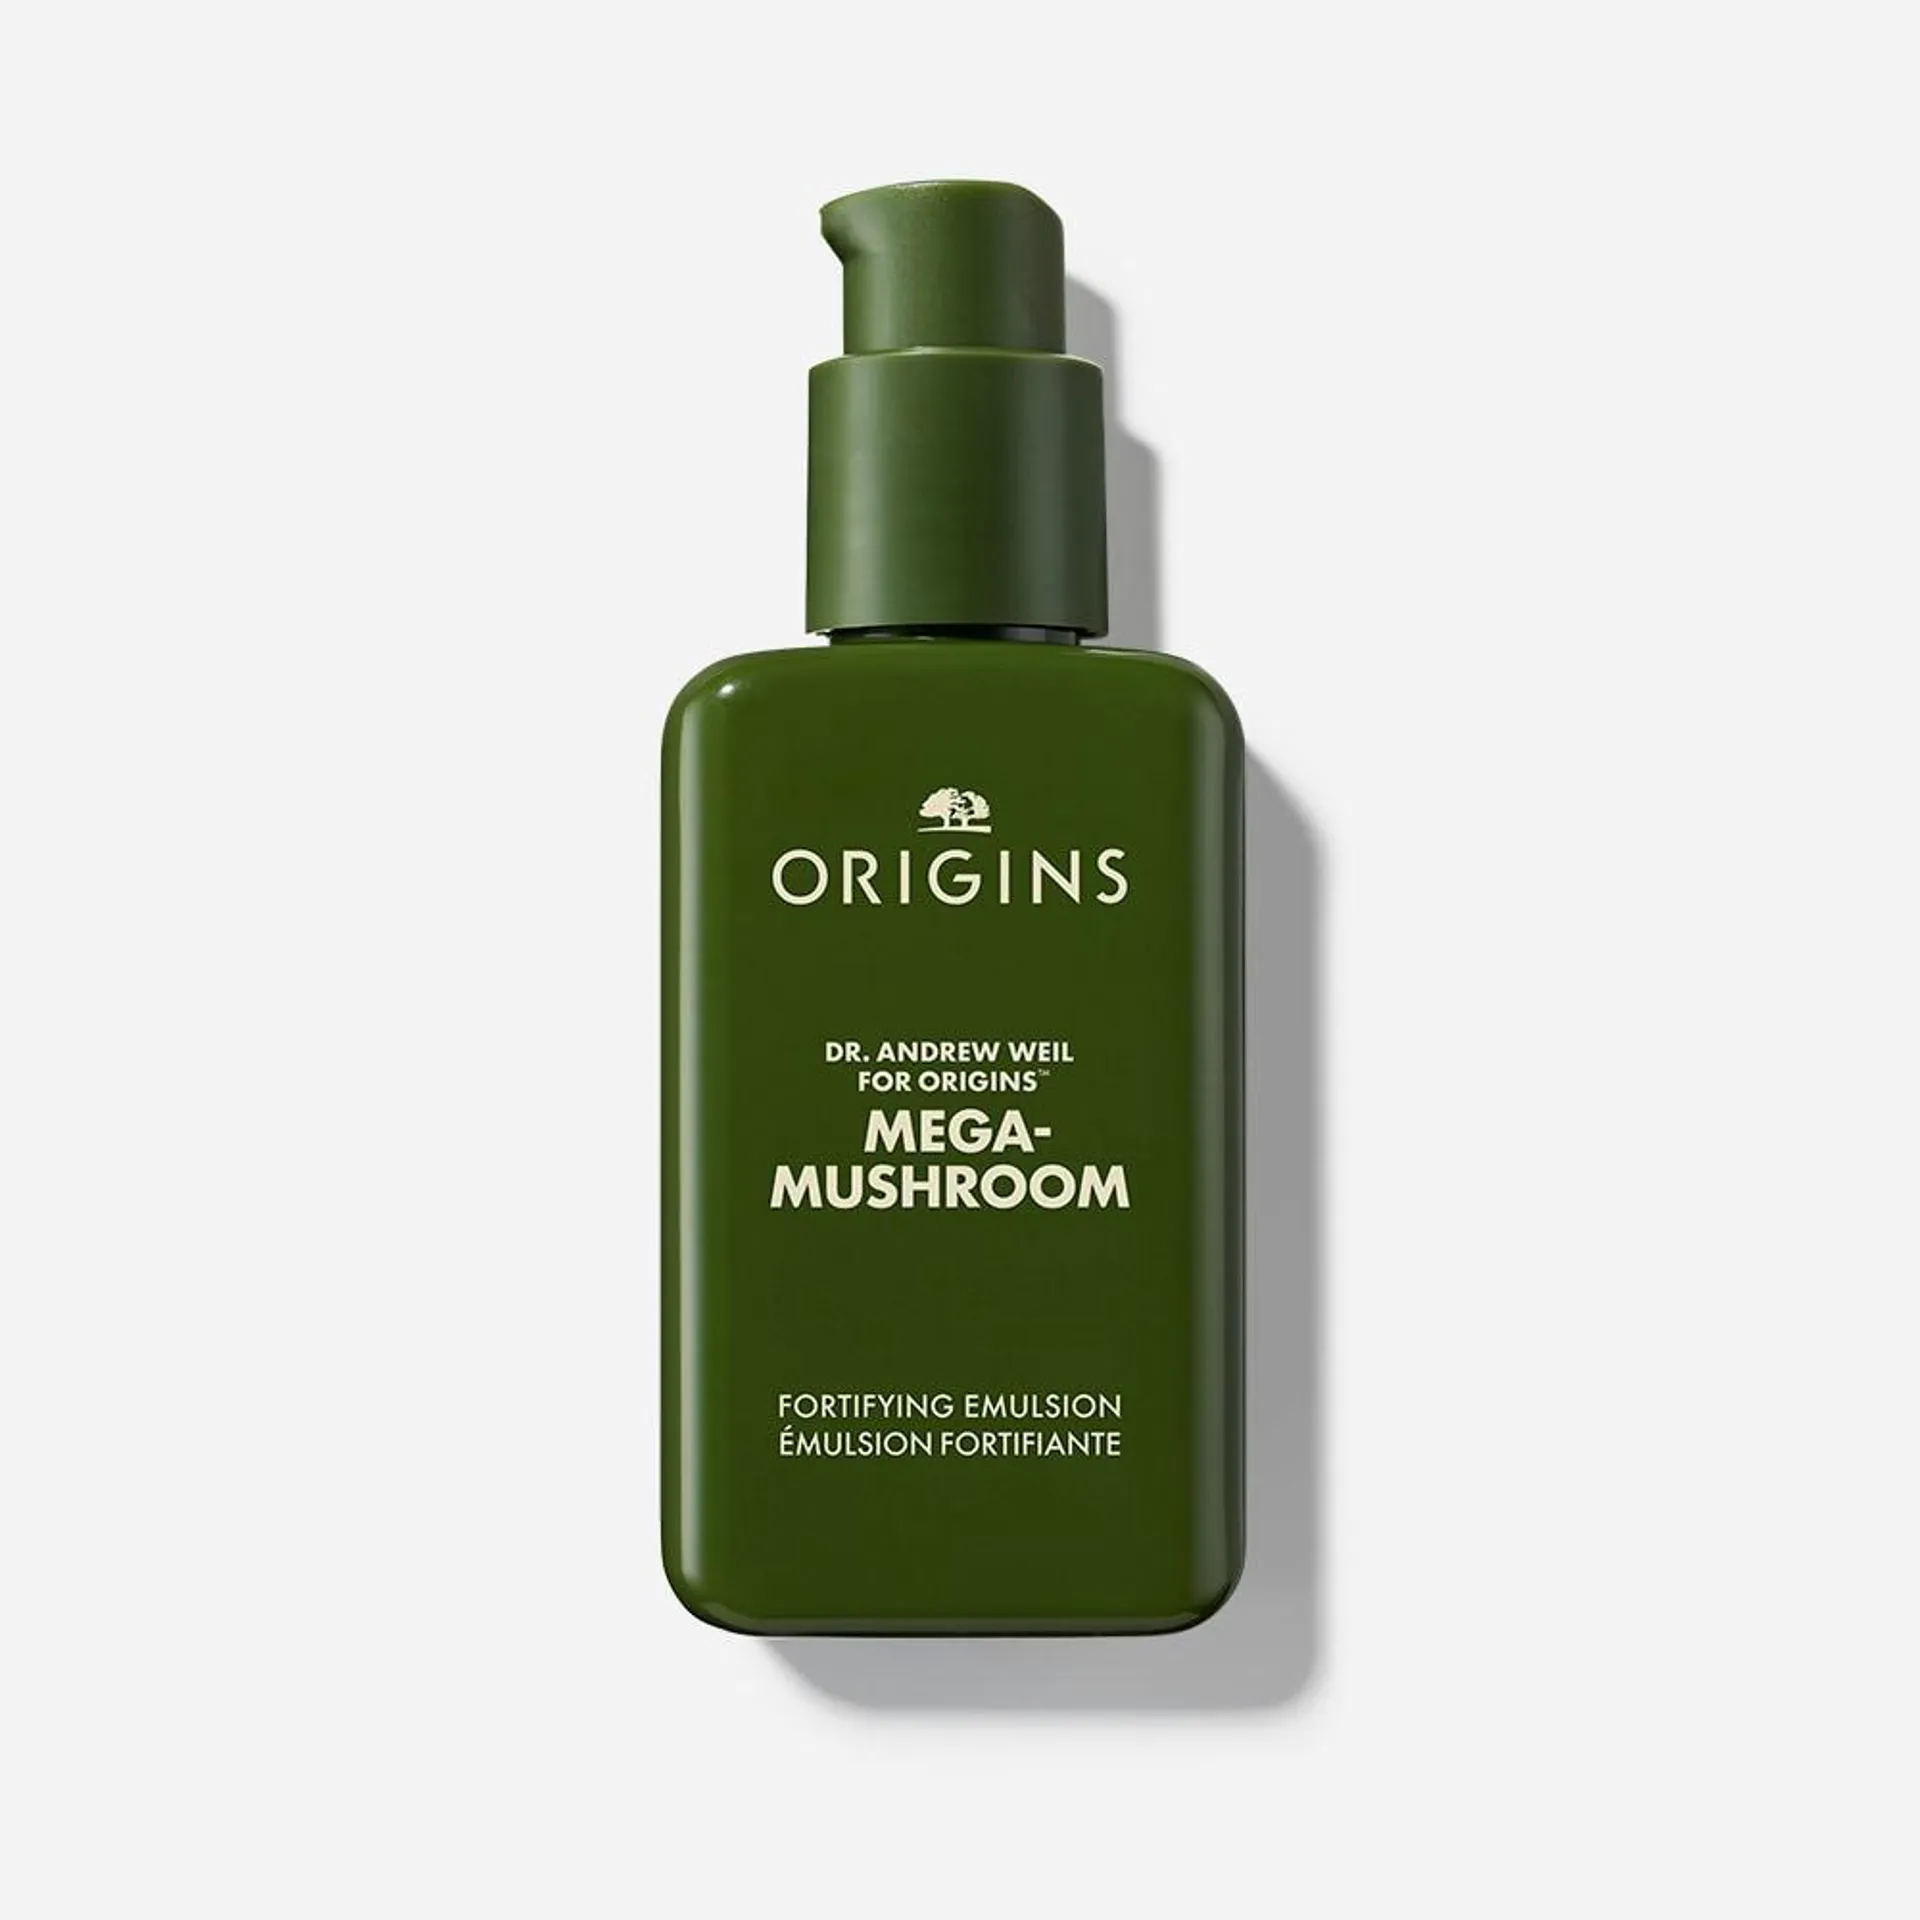 Dr. Andrew Weil for Origins™ Mega-Mushroom Relief & Resilience Fortifying Emulsion